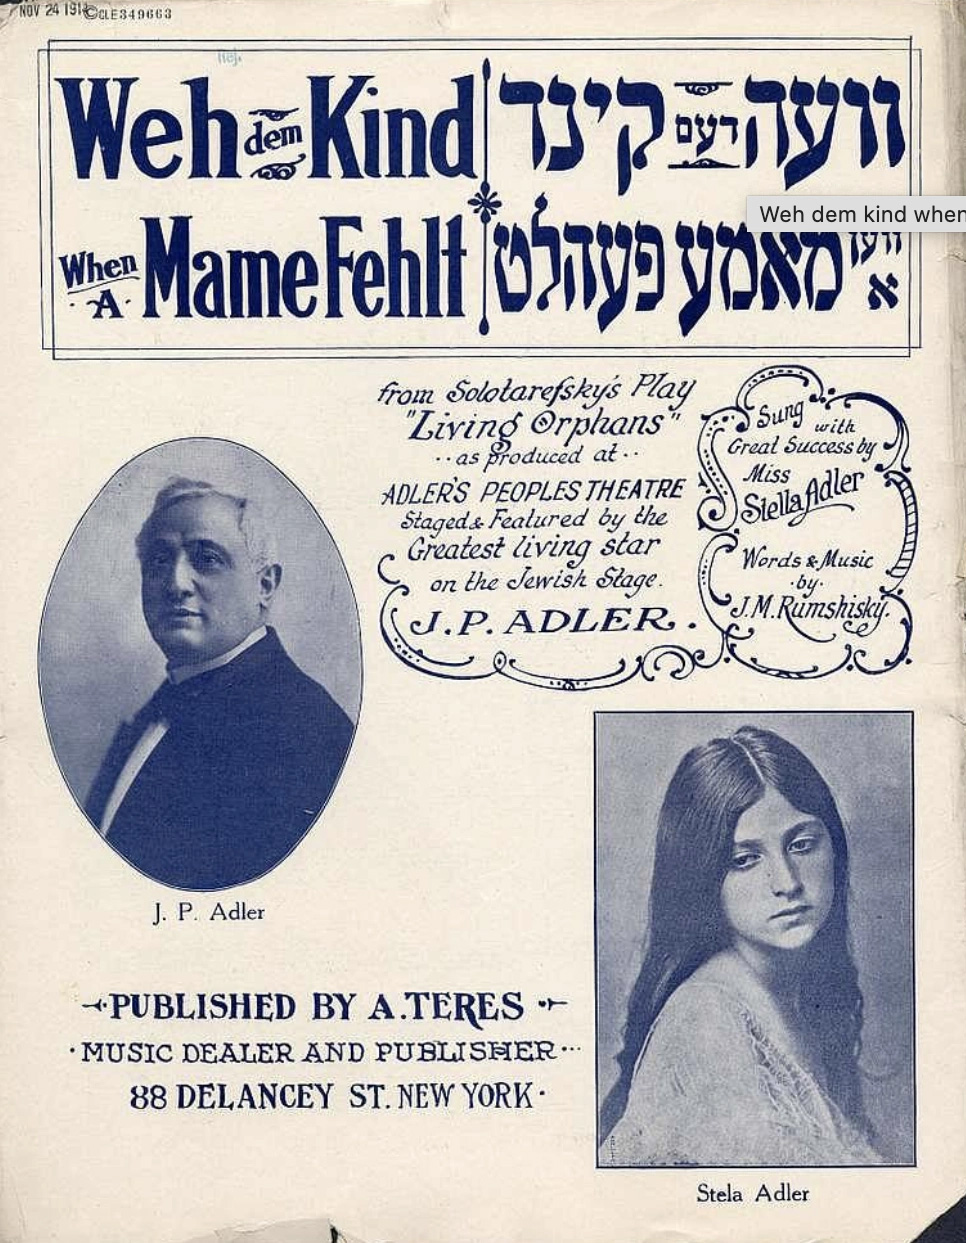 Turn-of-the-century style poster reading: "Weh dem Kind: When A MameFehlt" alongside Hebrew writing, featuring photos of J.P. Adler in a suit and a young "Stela Adler" with long dark hair